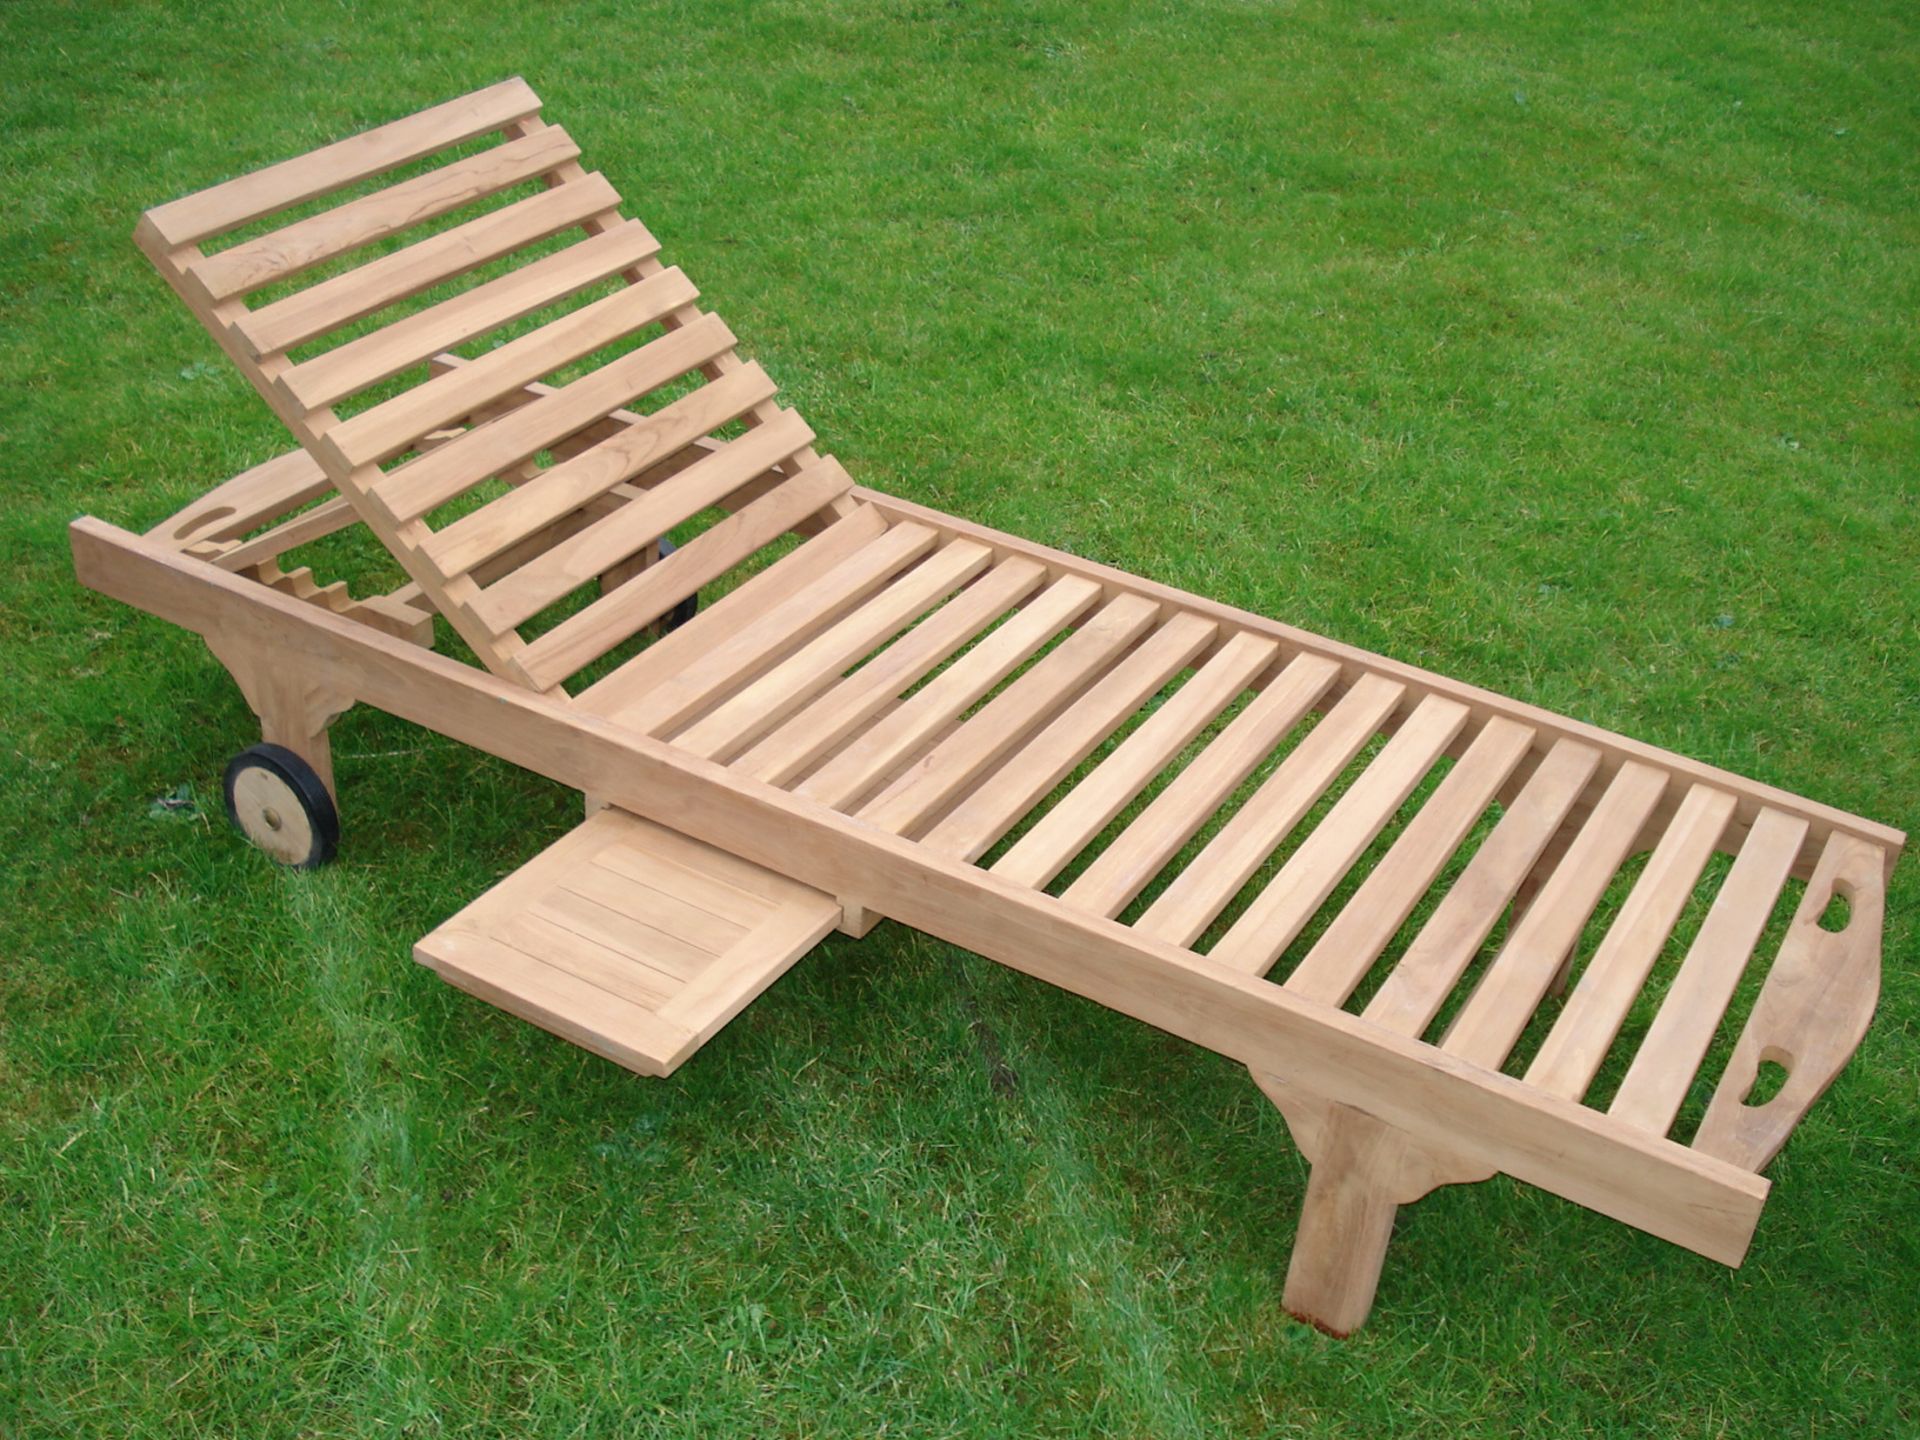 NEW PACKAGED SOLID TEAK SUNLOUNGER ON RUBBER BOUND TEAK WHEELS, WITH EXTENDING SIDE TABLE - Image 2 of 2